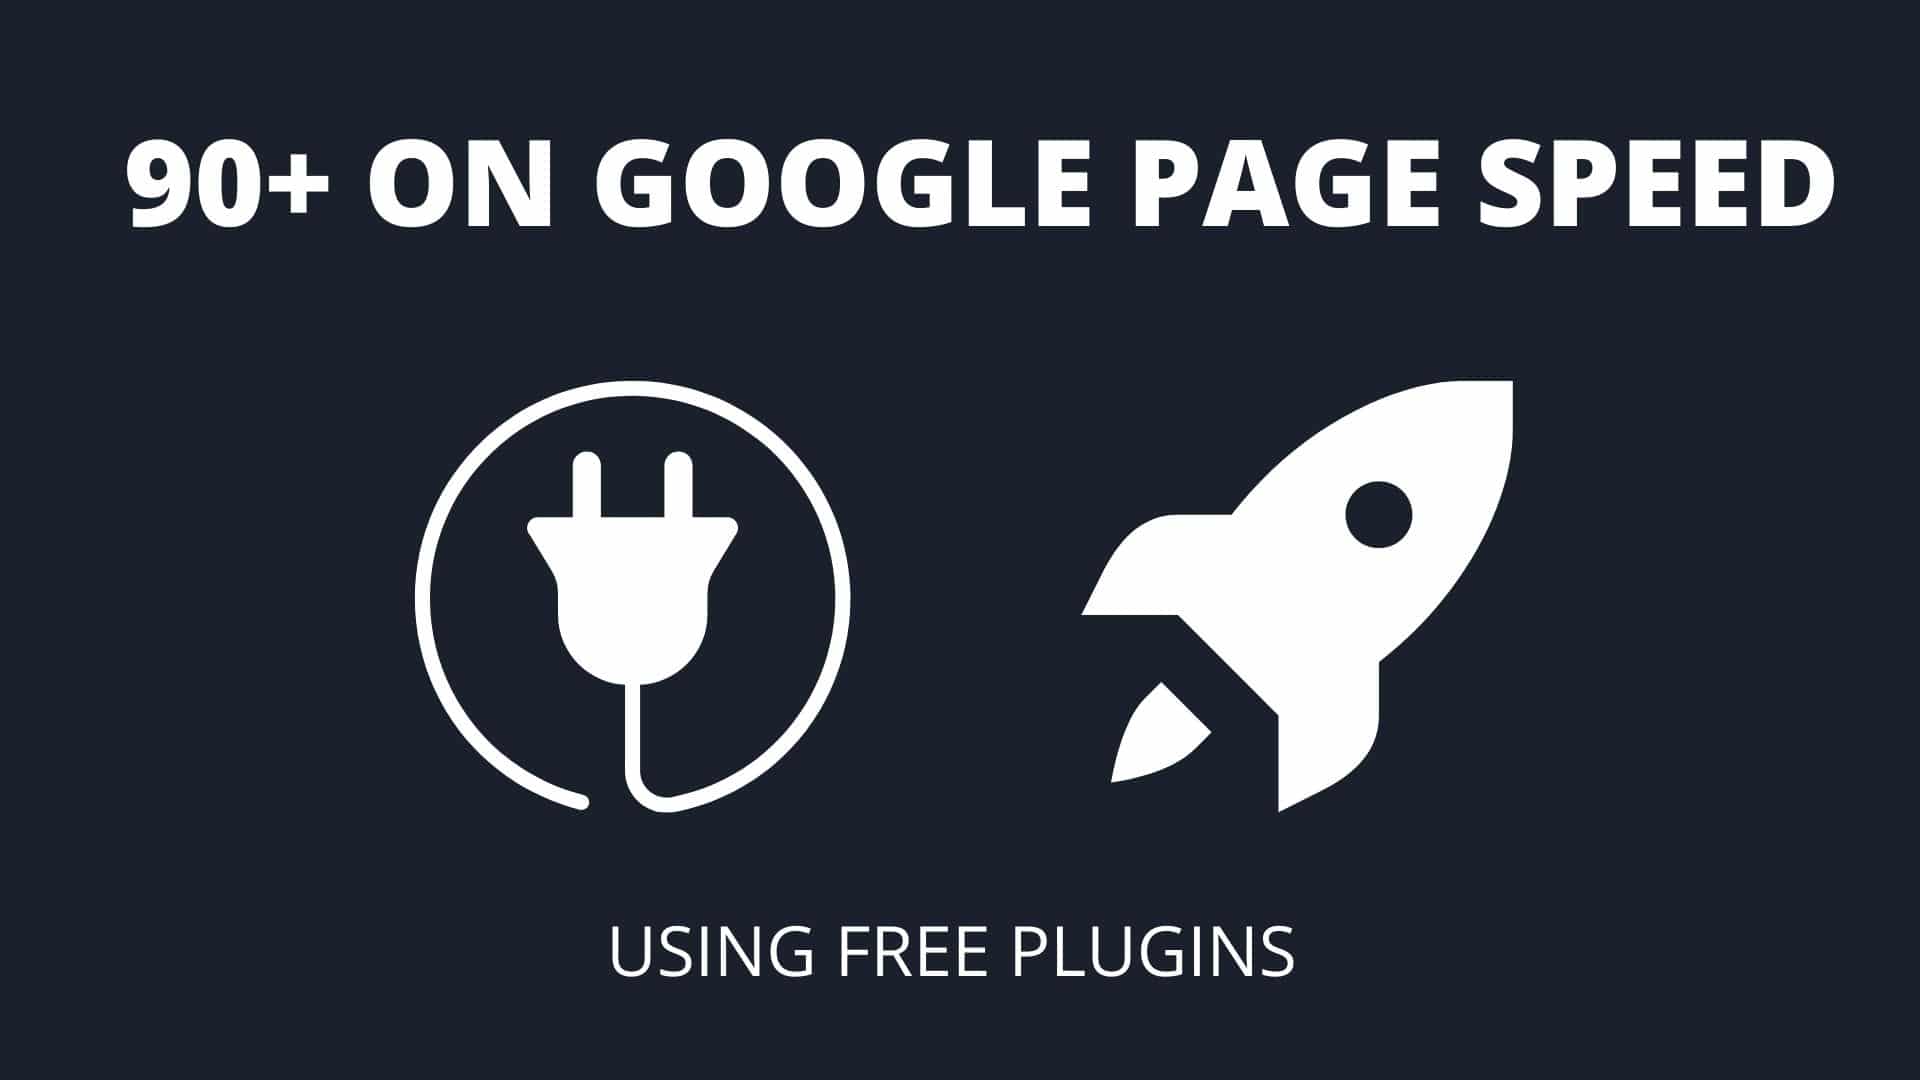 90+ on Google Page Speed Insights by optimizing a WordPress Website with Free Plugins